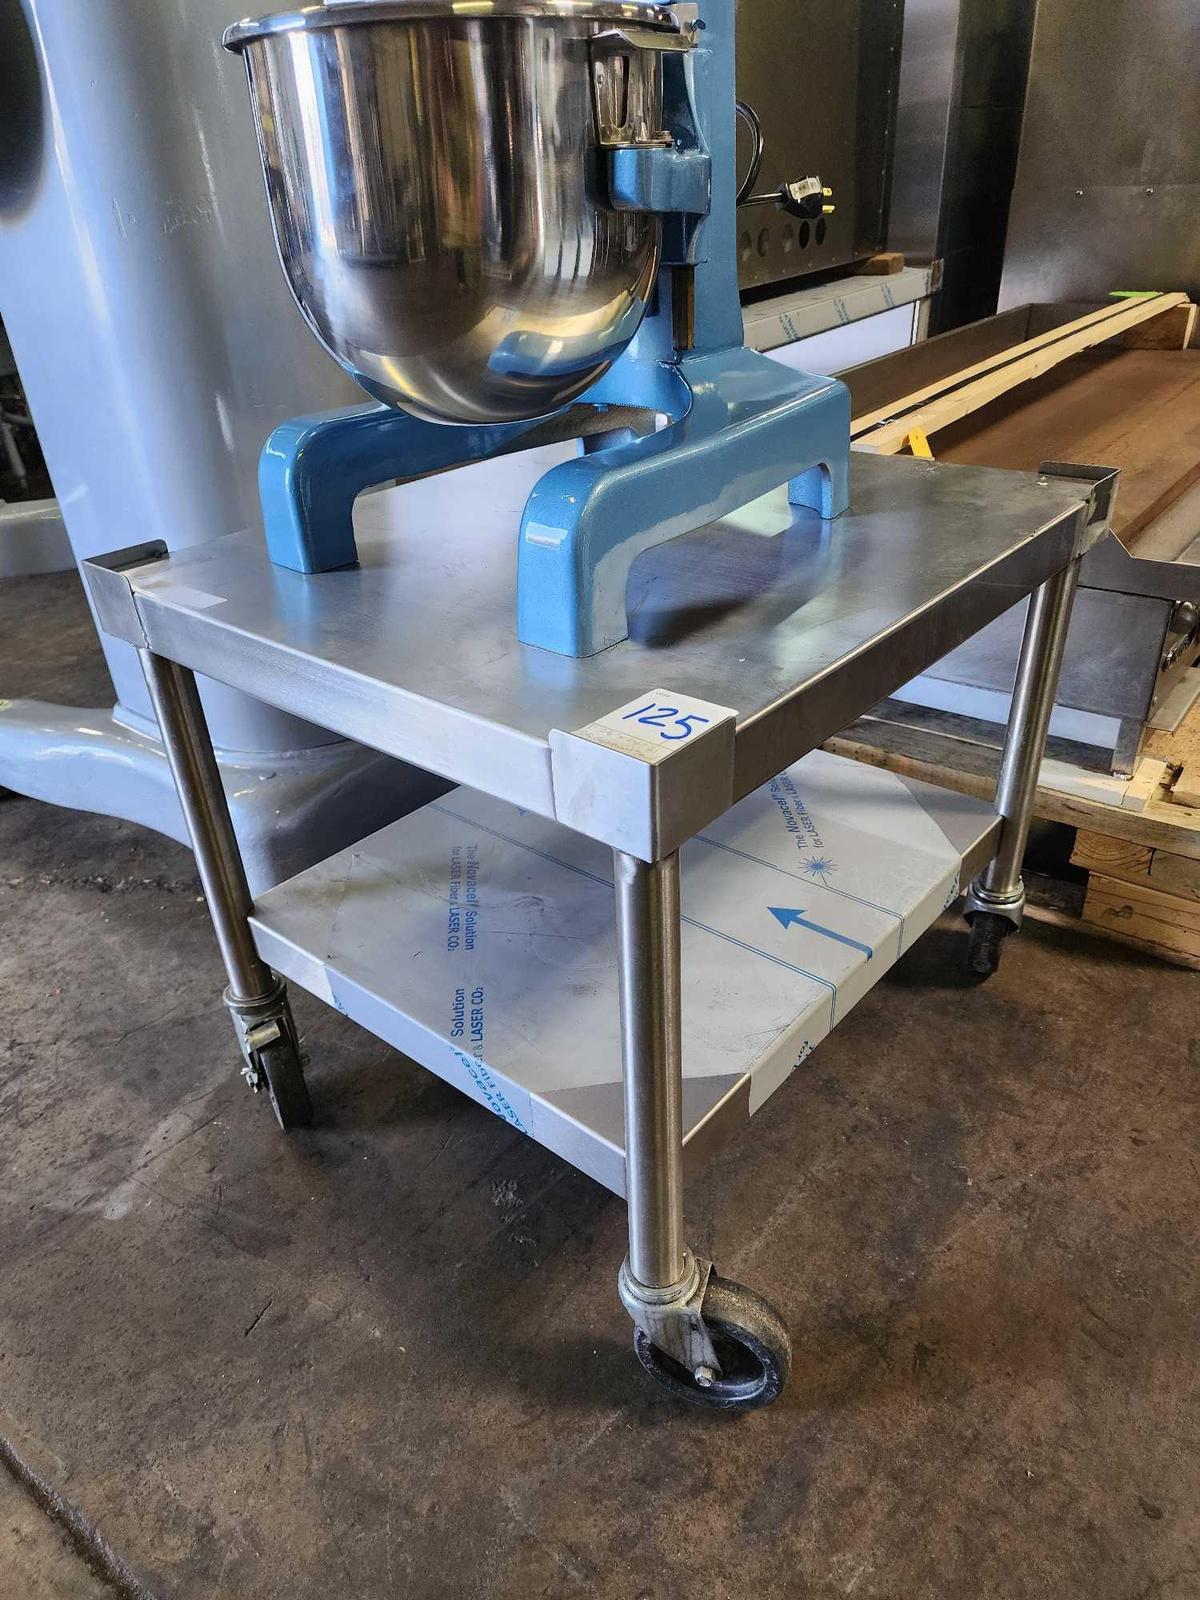 28 in. x 28 in. All Stainless Steel Equipment Stand on Casters